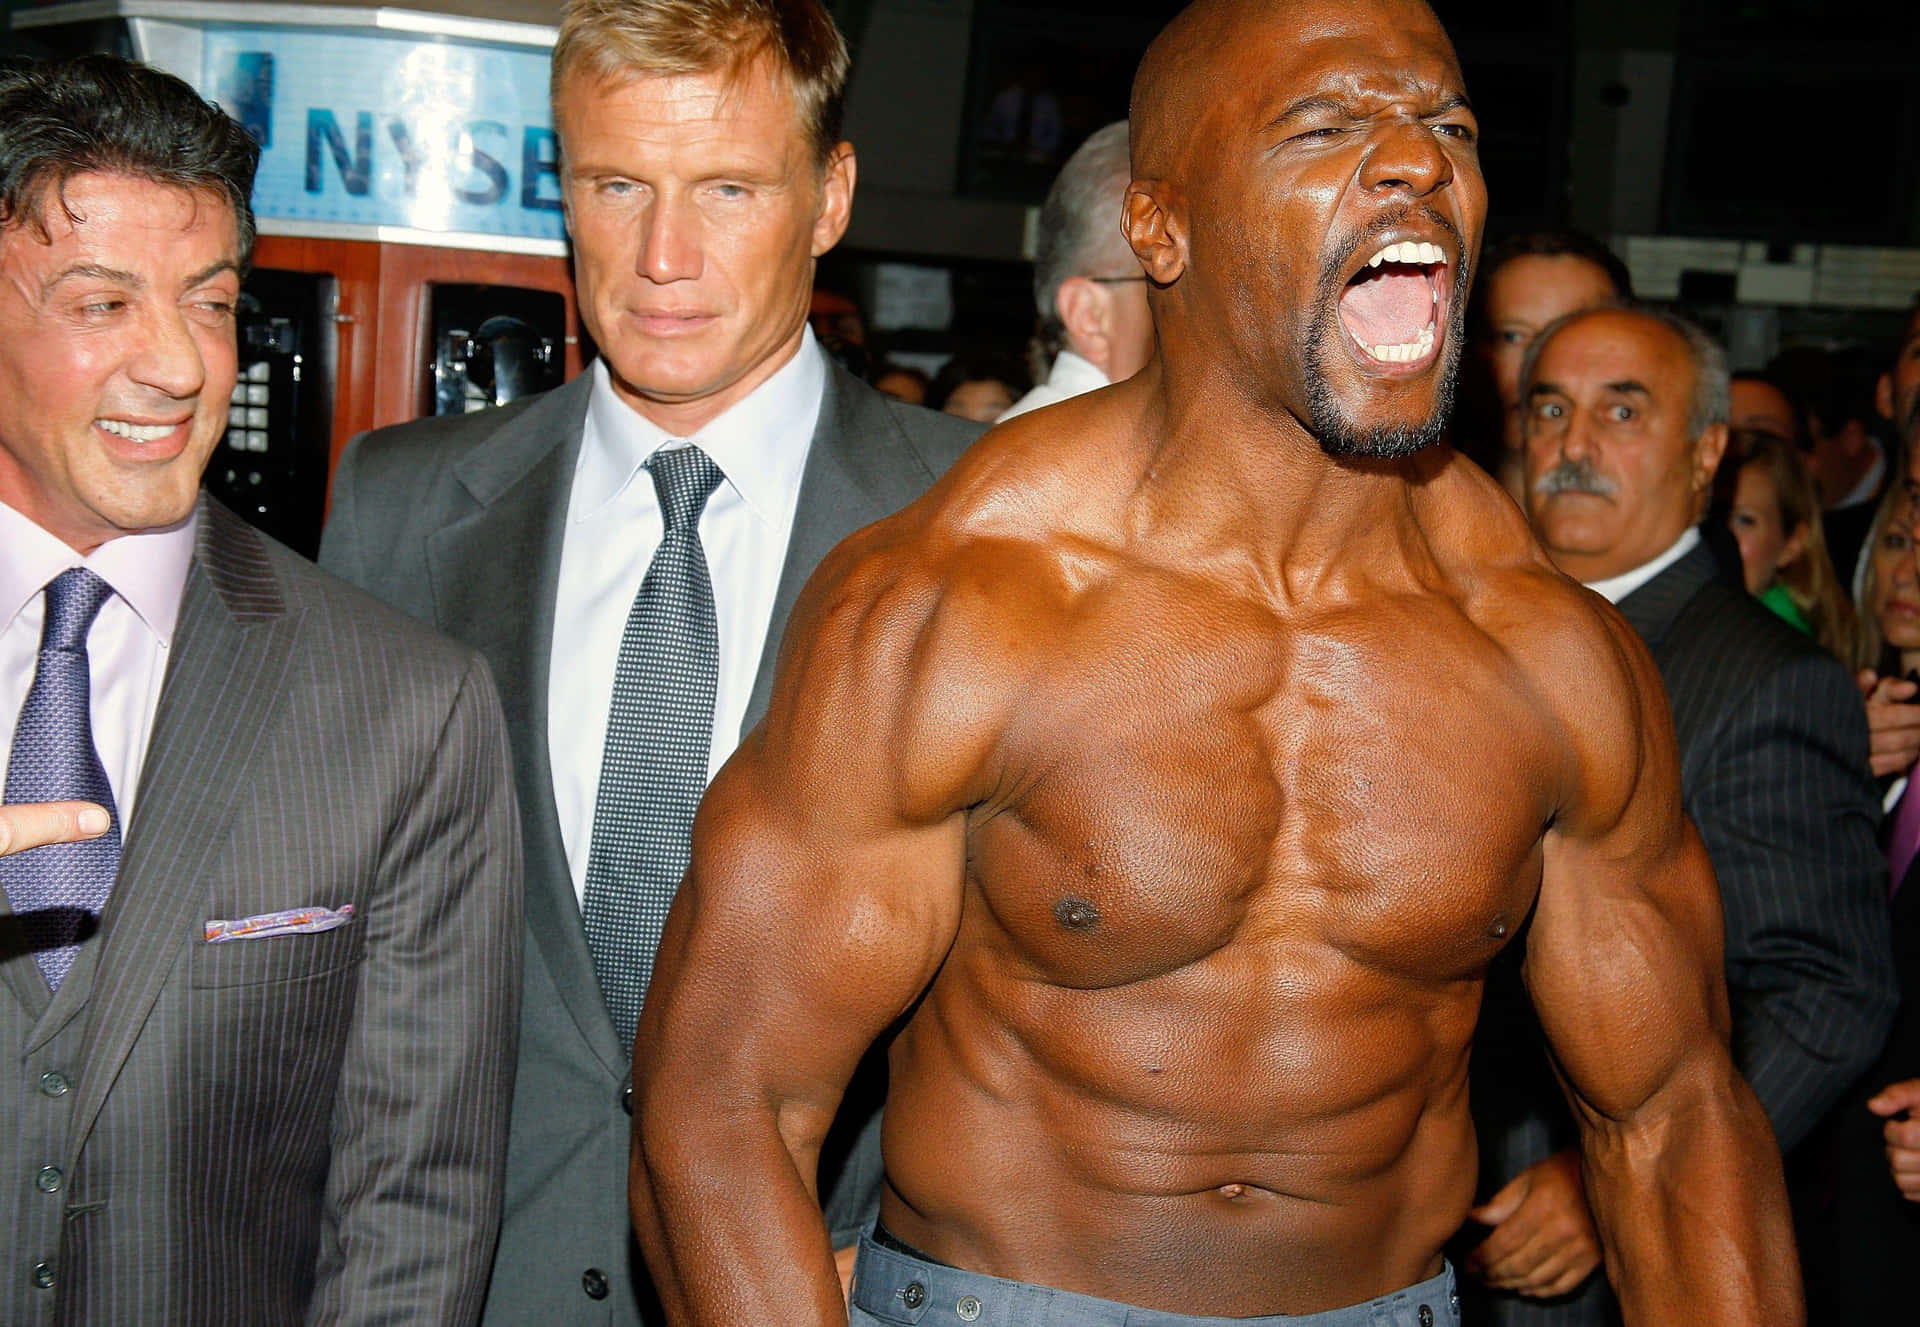 Actor and former NFL player, Terry Crews. Wallpaper